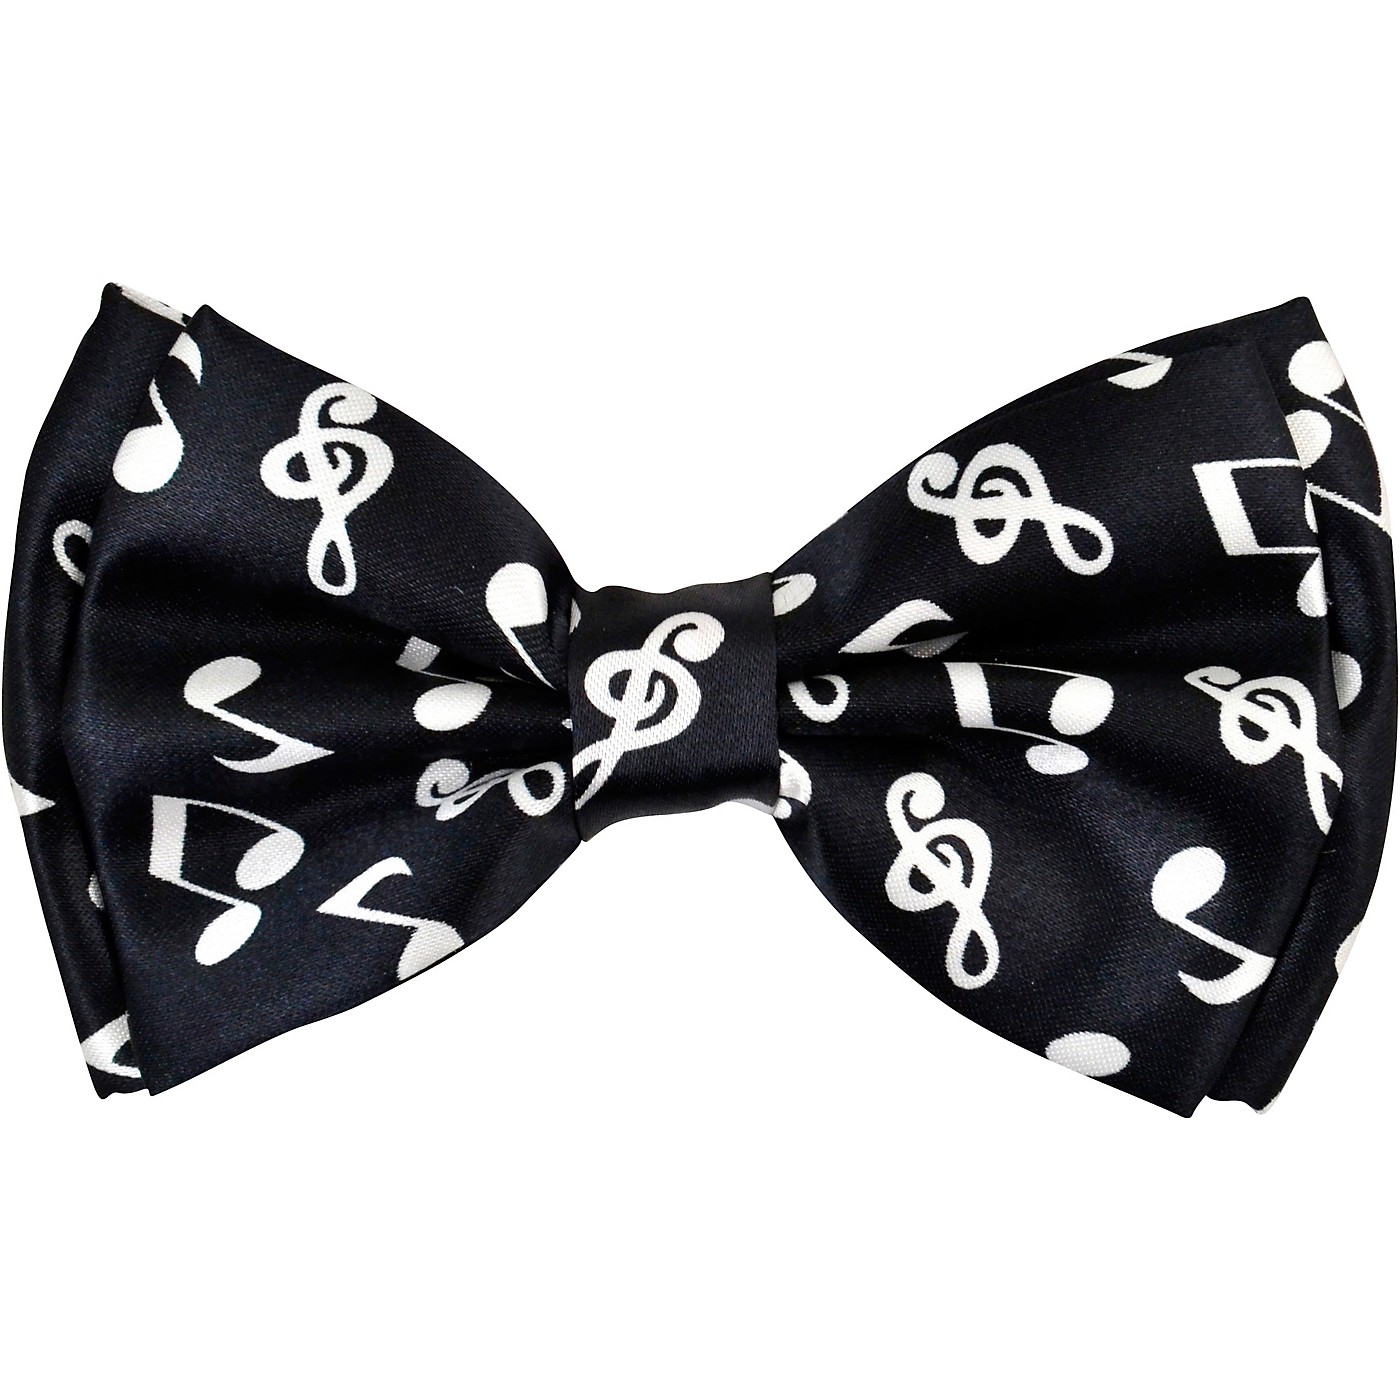 AIM Black and White Bow Tie With Music Notes thumbnail